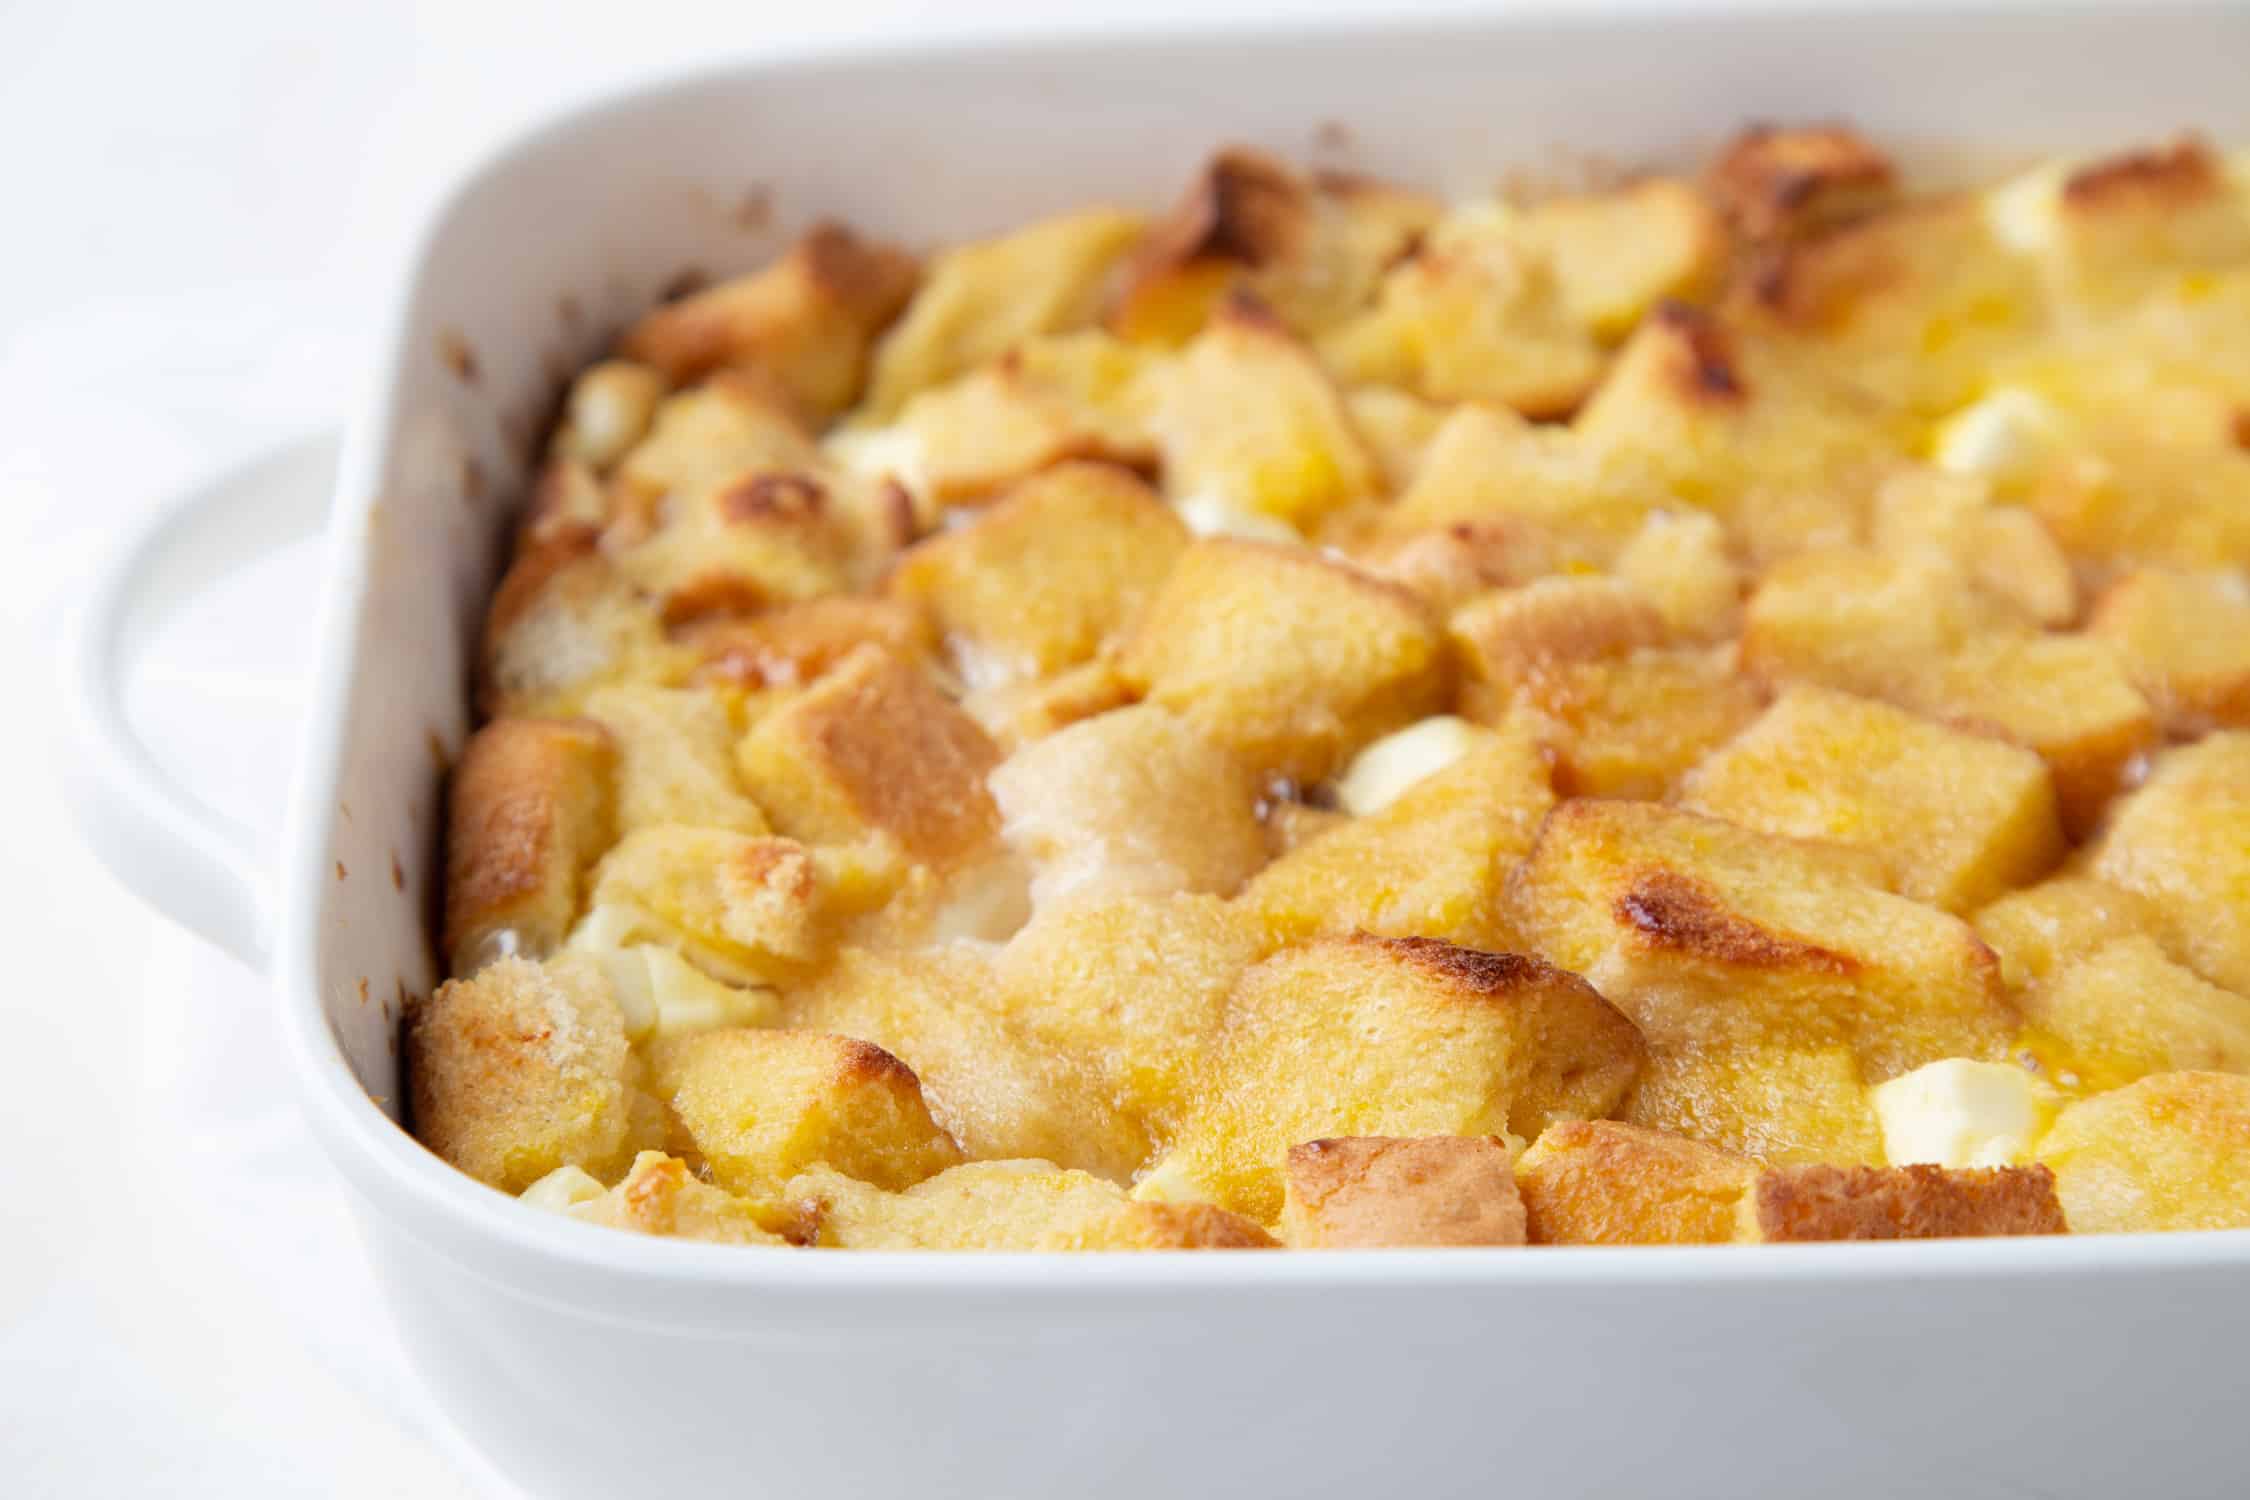 baked stuffed french toast in a white casserole dish with handles.